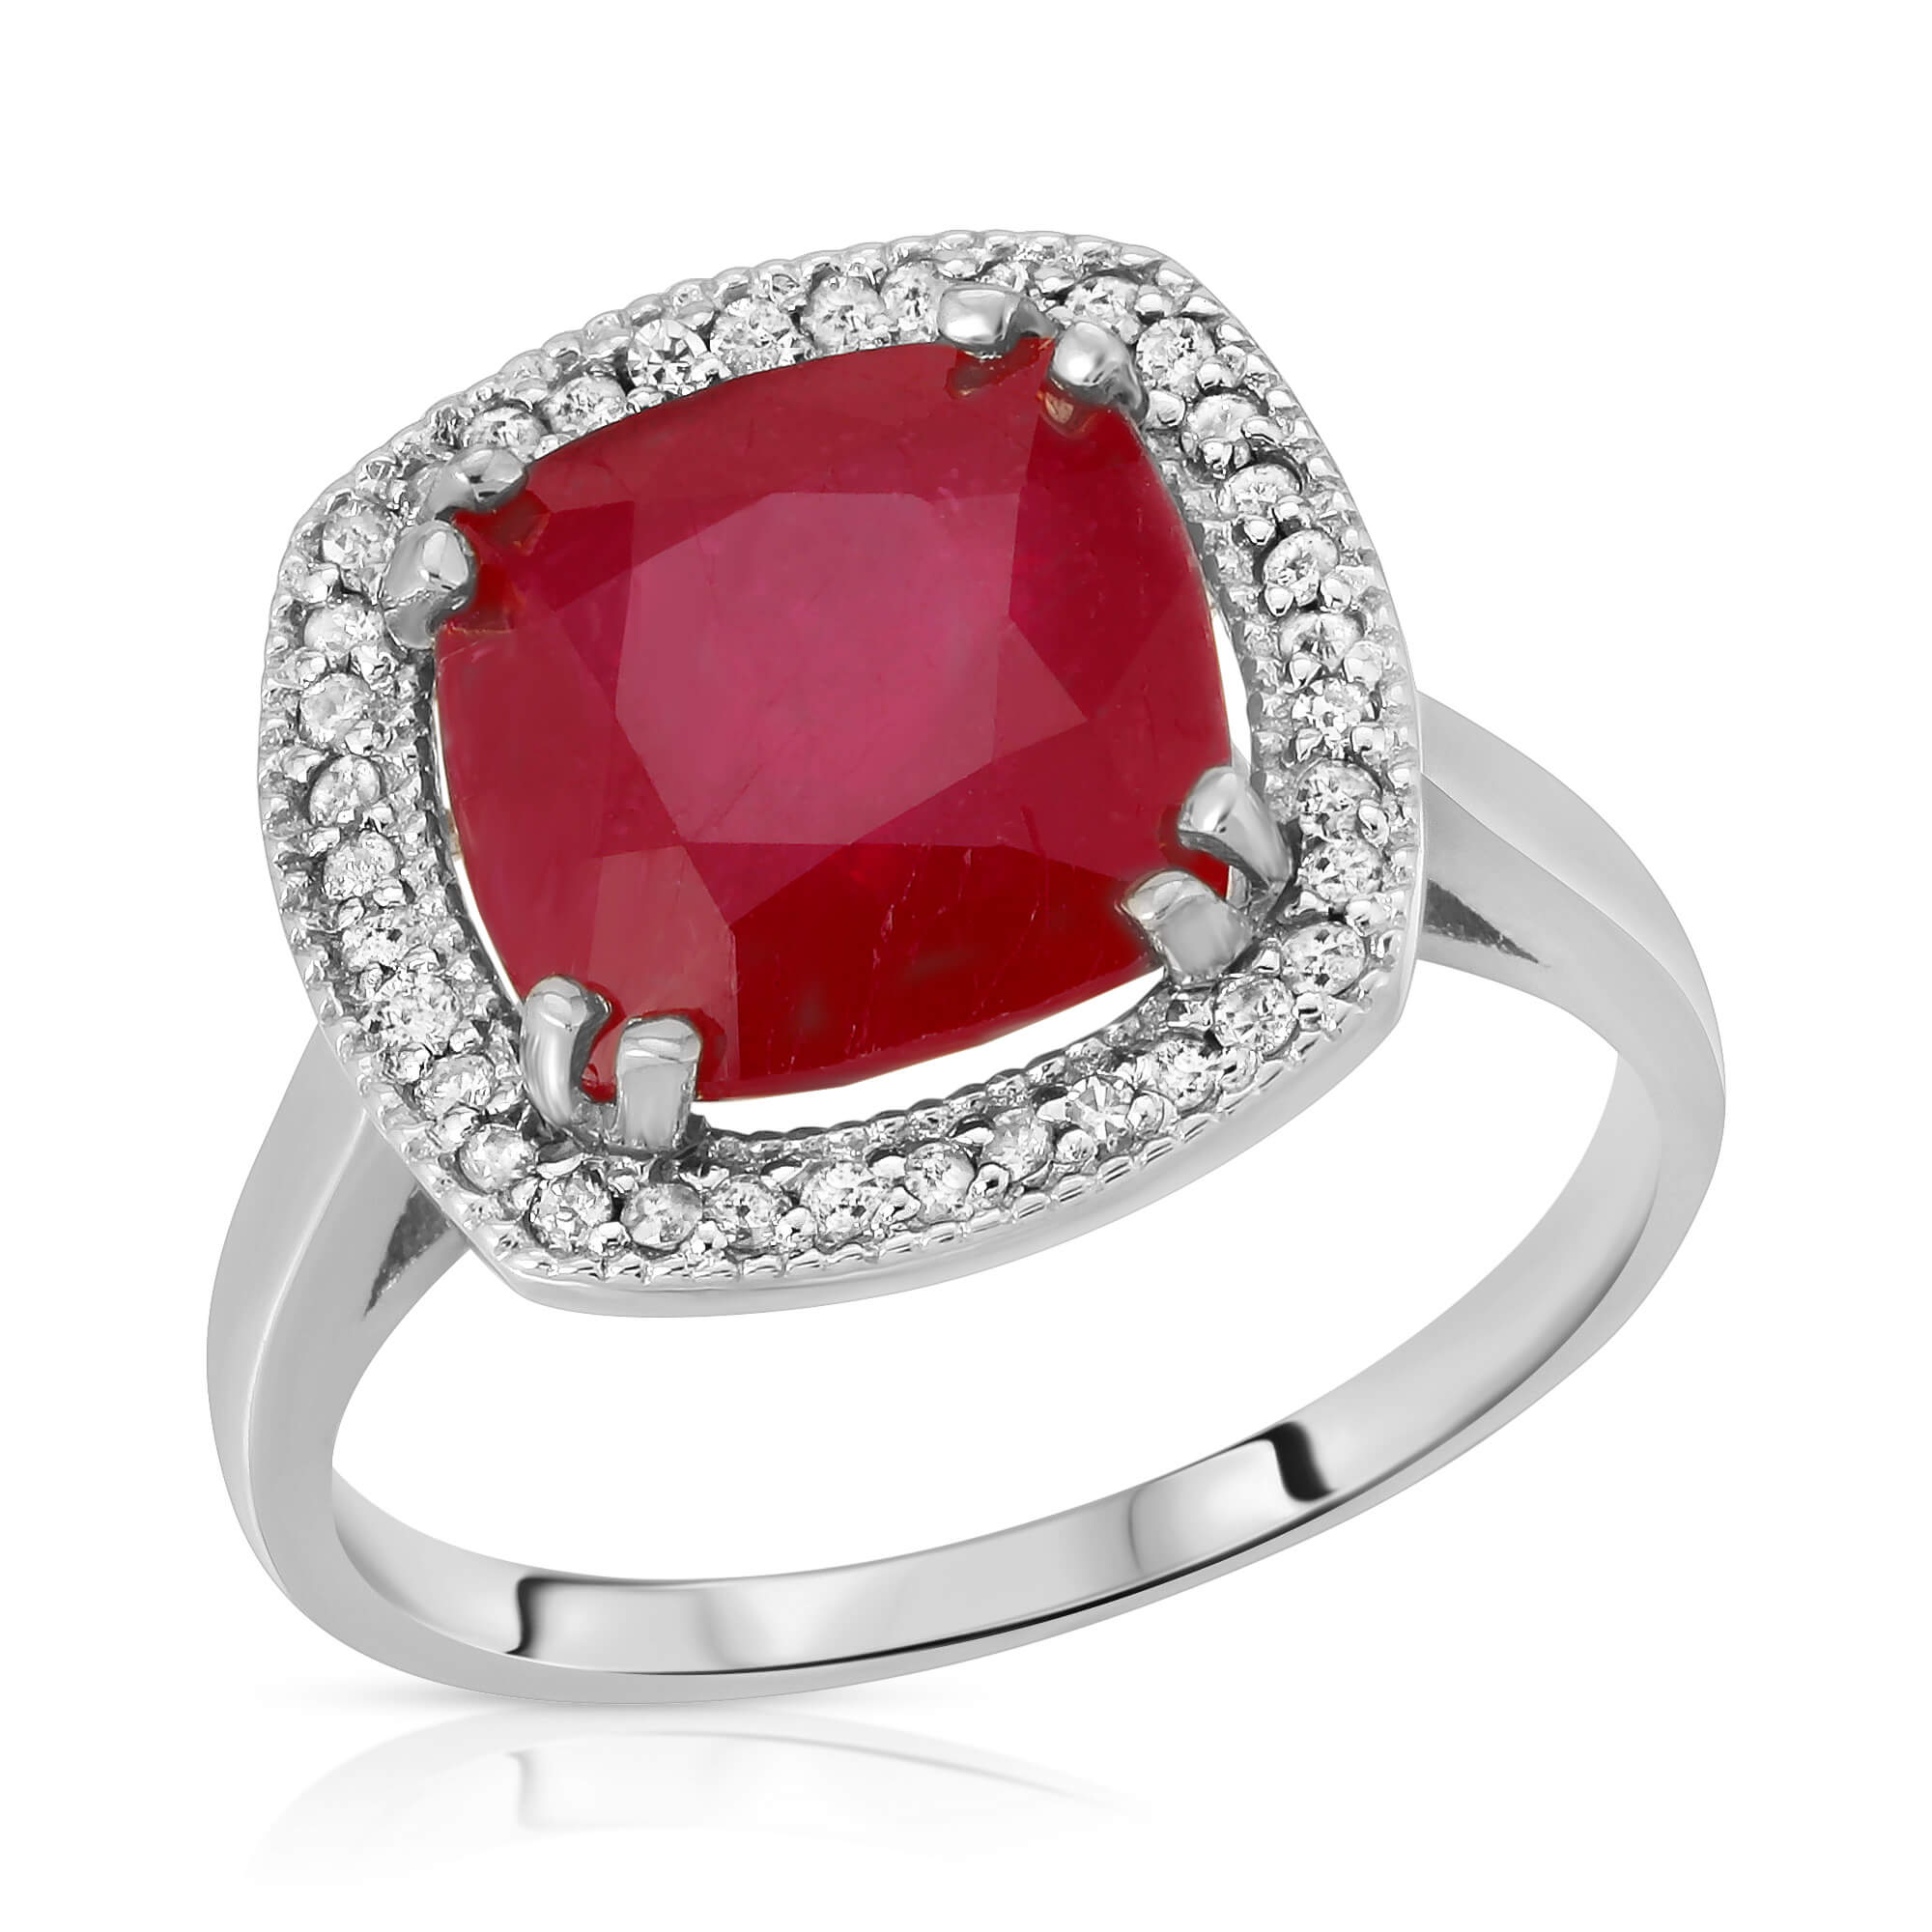 Cushion Cut Ruby Ring 6.9 ctw in Sterling Silver